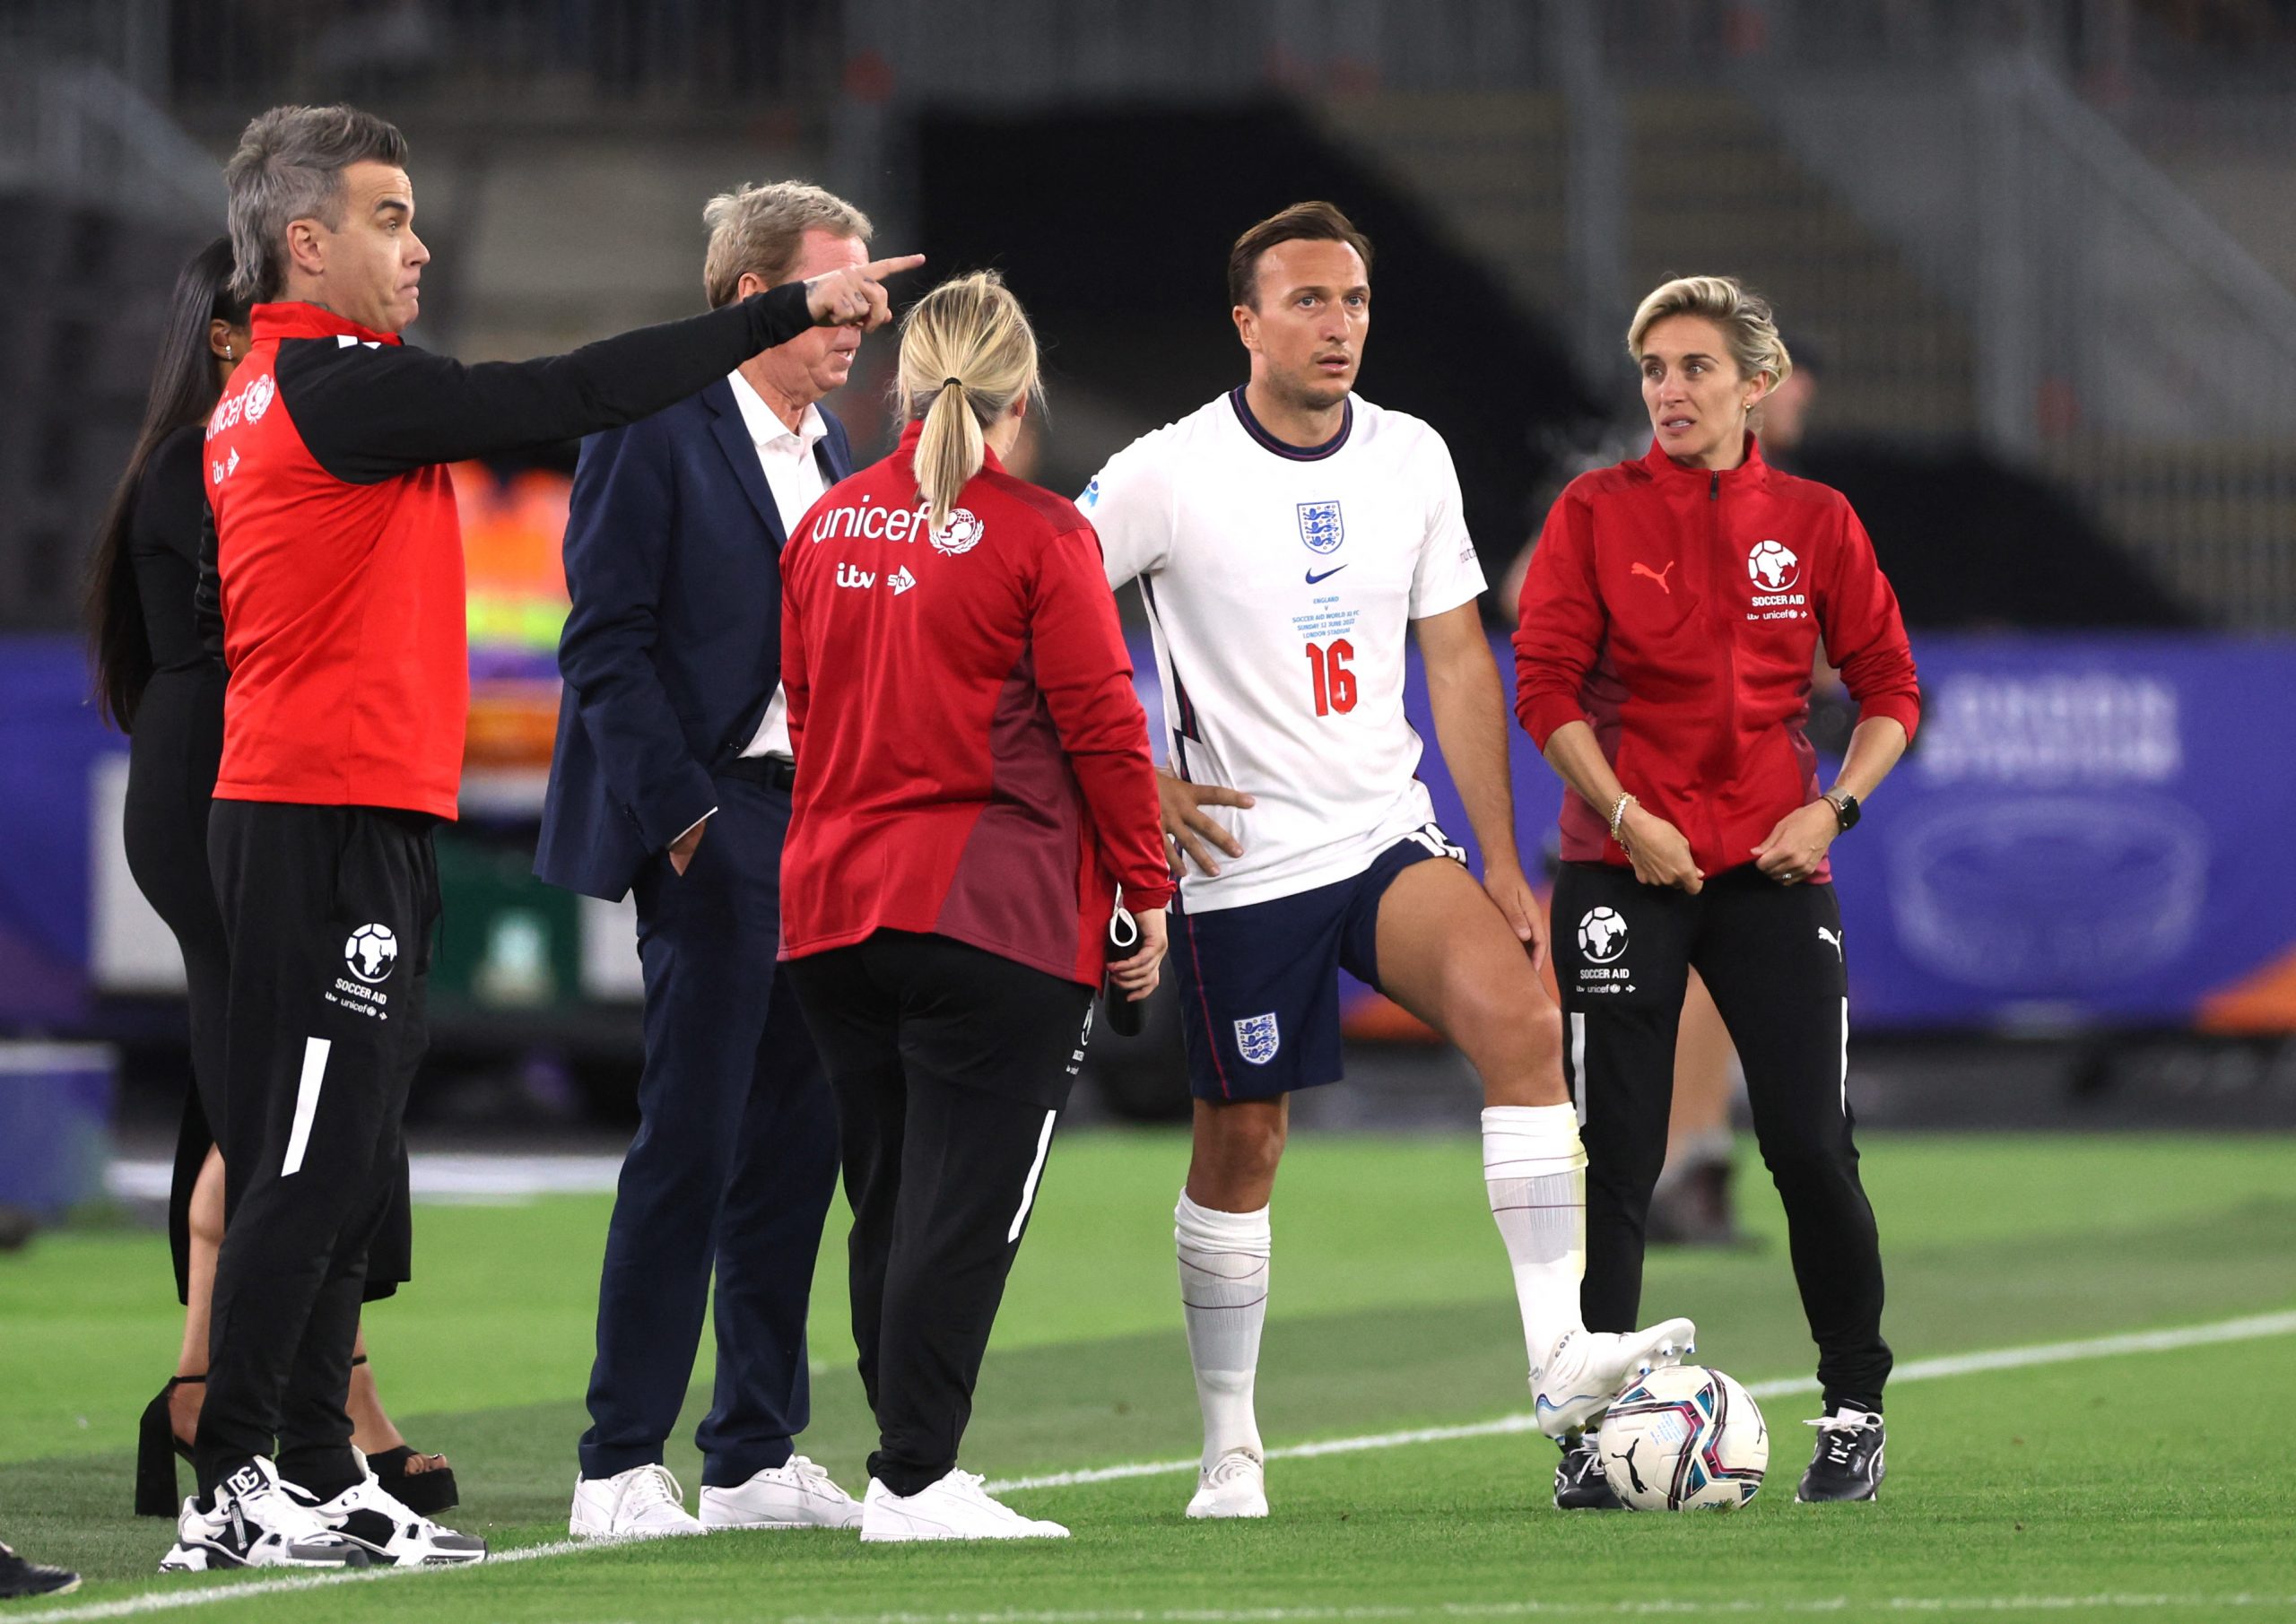 Robbie Williams with England's Harry Redknapp, Emma Hayes, Mark Noble and Vicky Mcclure Action Images via Reuters/Matthew Childs